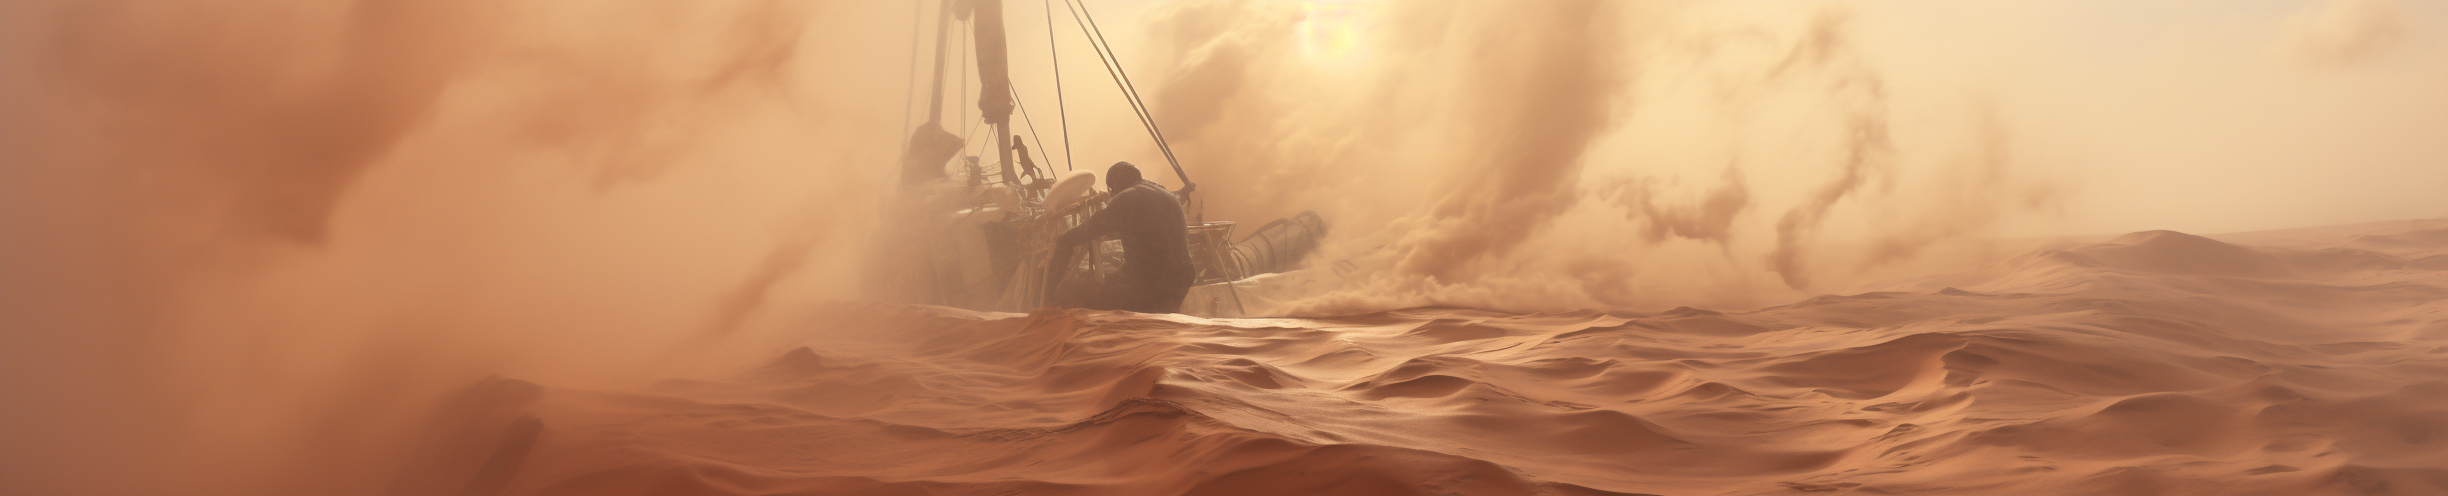 tychodreq_from_the_deck_of_our_sand_schooner_we_watch_as_the_en_abf2ab60-3ef3-4545-8033-9755f5804a75.png